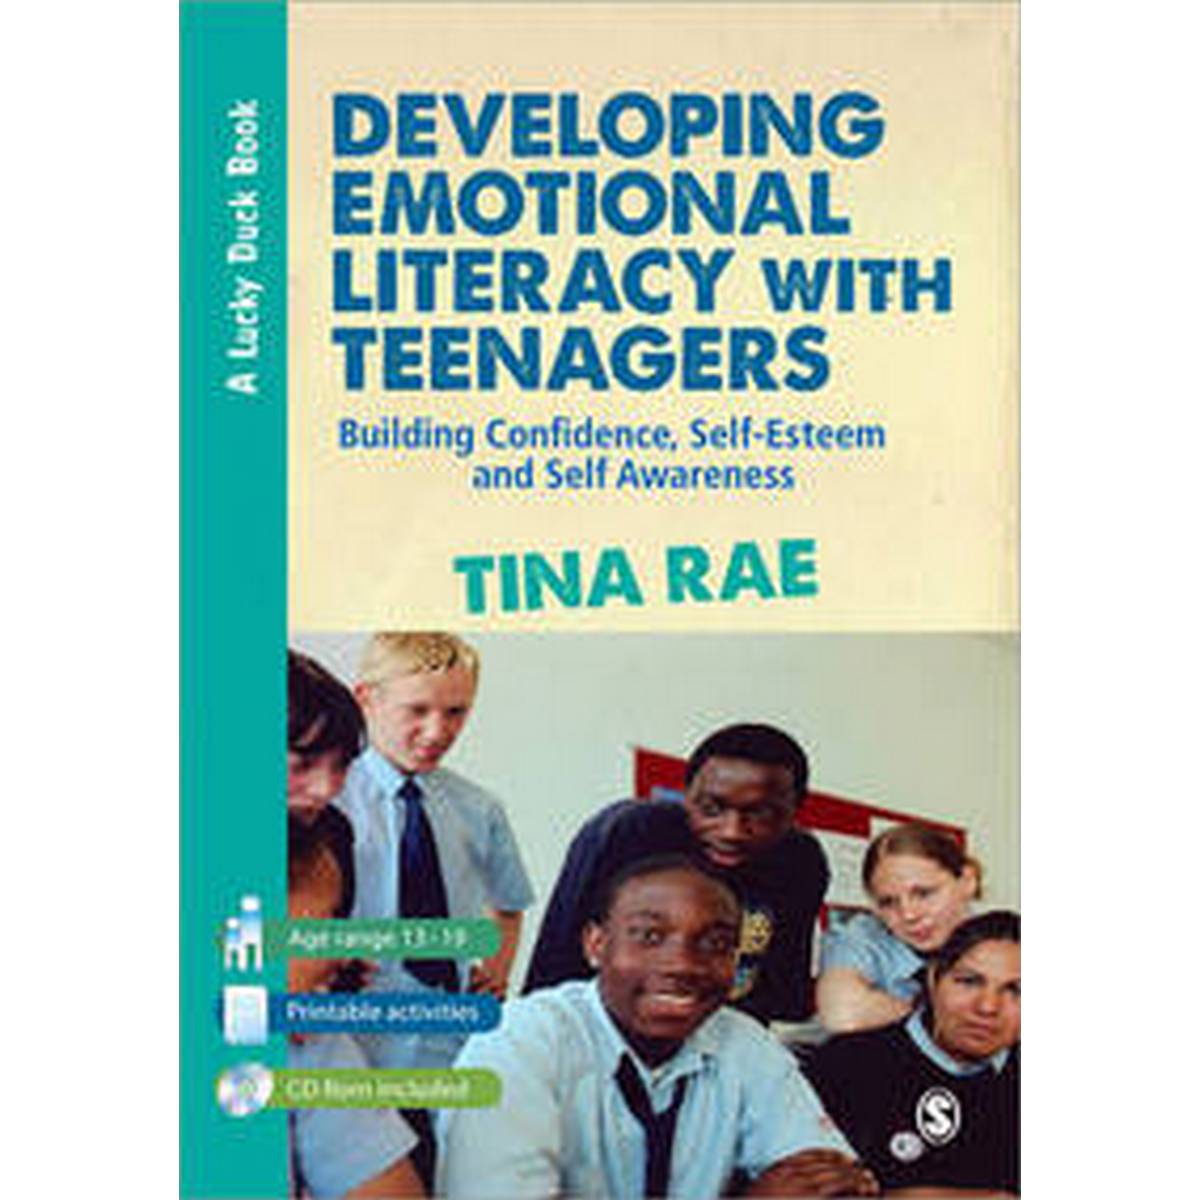 Developing Emotional Literacy with Teenagers: Building Confidence, Self-Esteem and Self Awareness (2nd Edition)